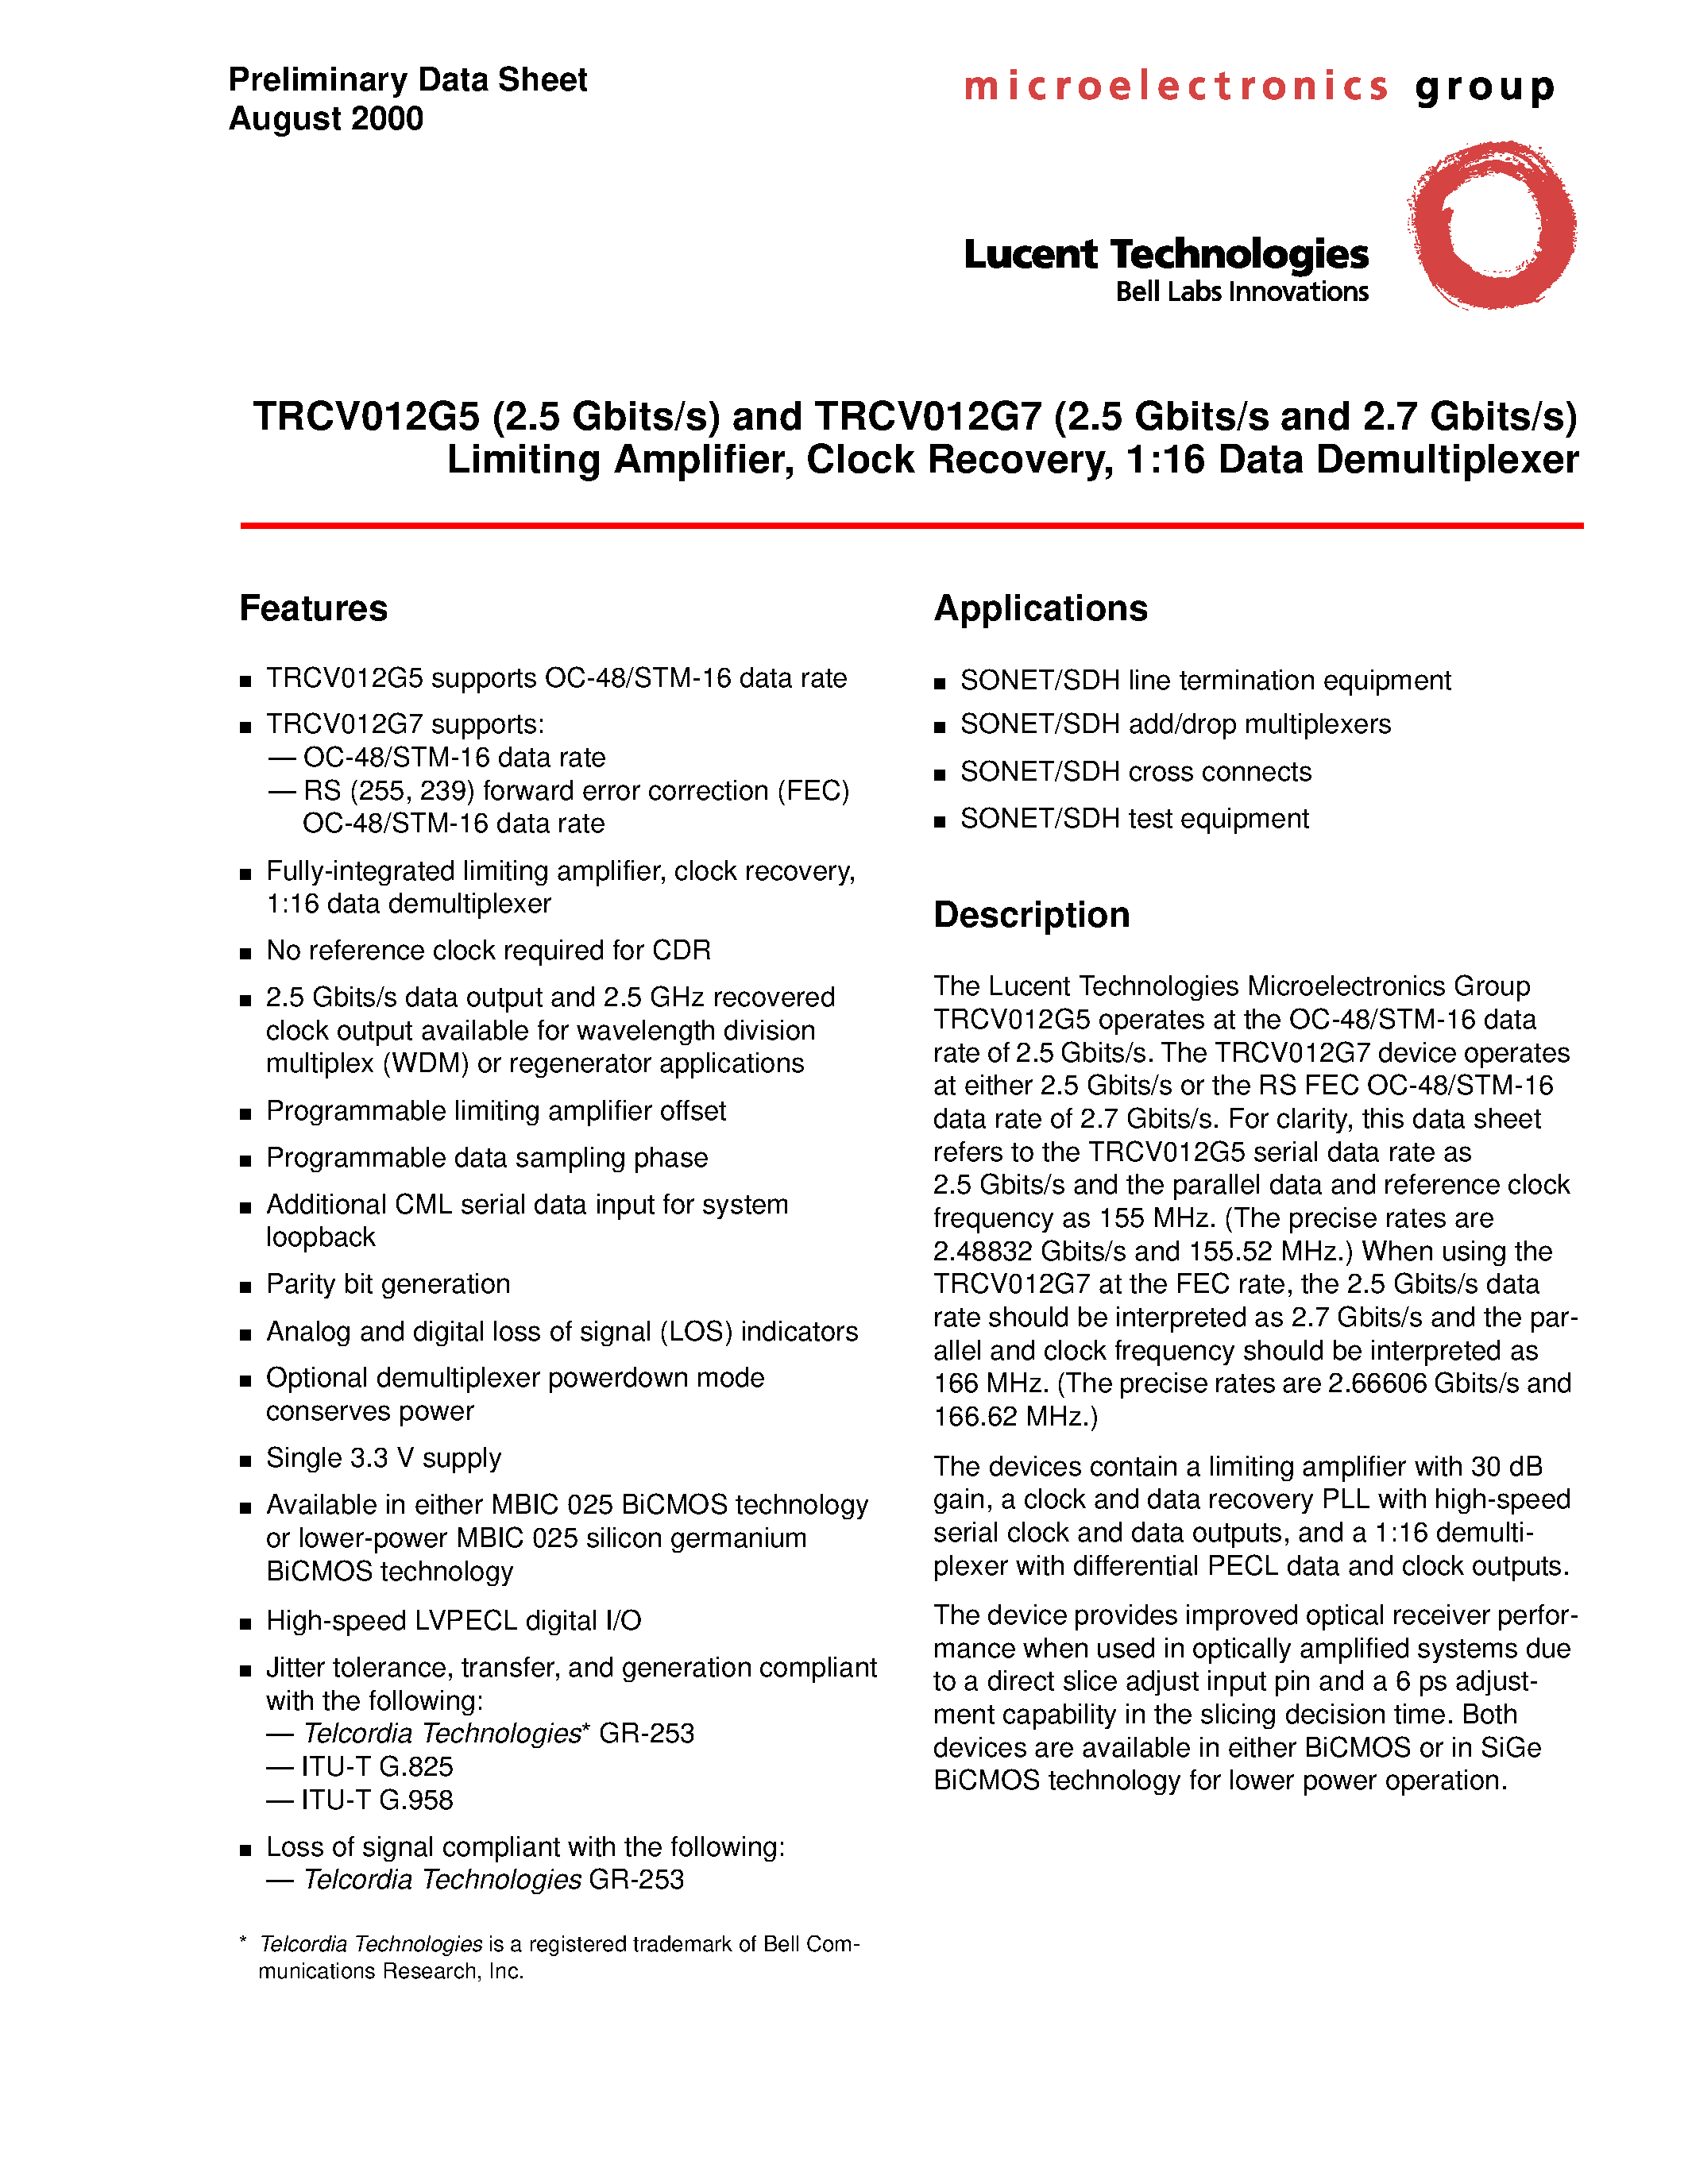 Datasheet TRCV012G7 - TRCV012G5 (2.5 Gbits/s) and TRCV012G7 (2.5 Gbits/s and 2.7 Gbits/s) Limiting Amplifier/ Clock Recovery/ 1:16 Data Demultiplexer page 1